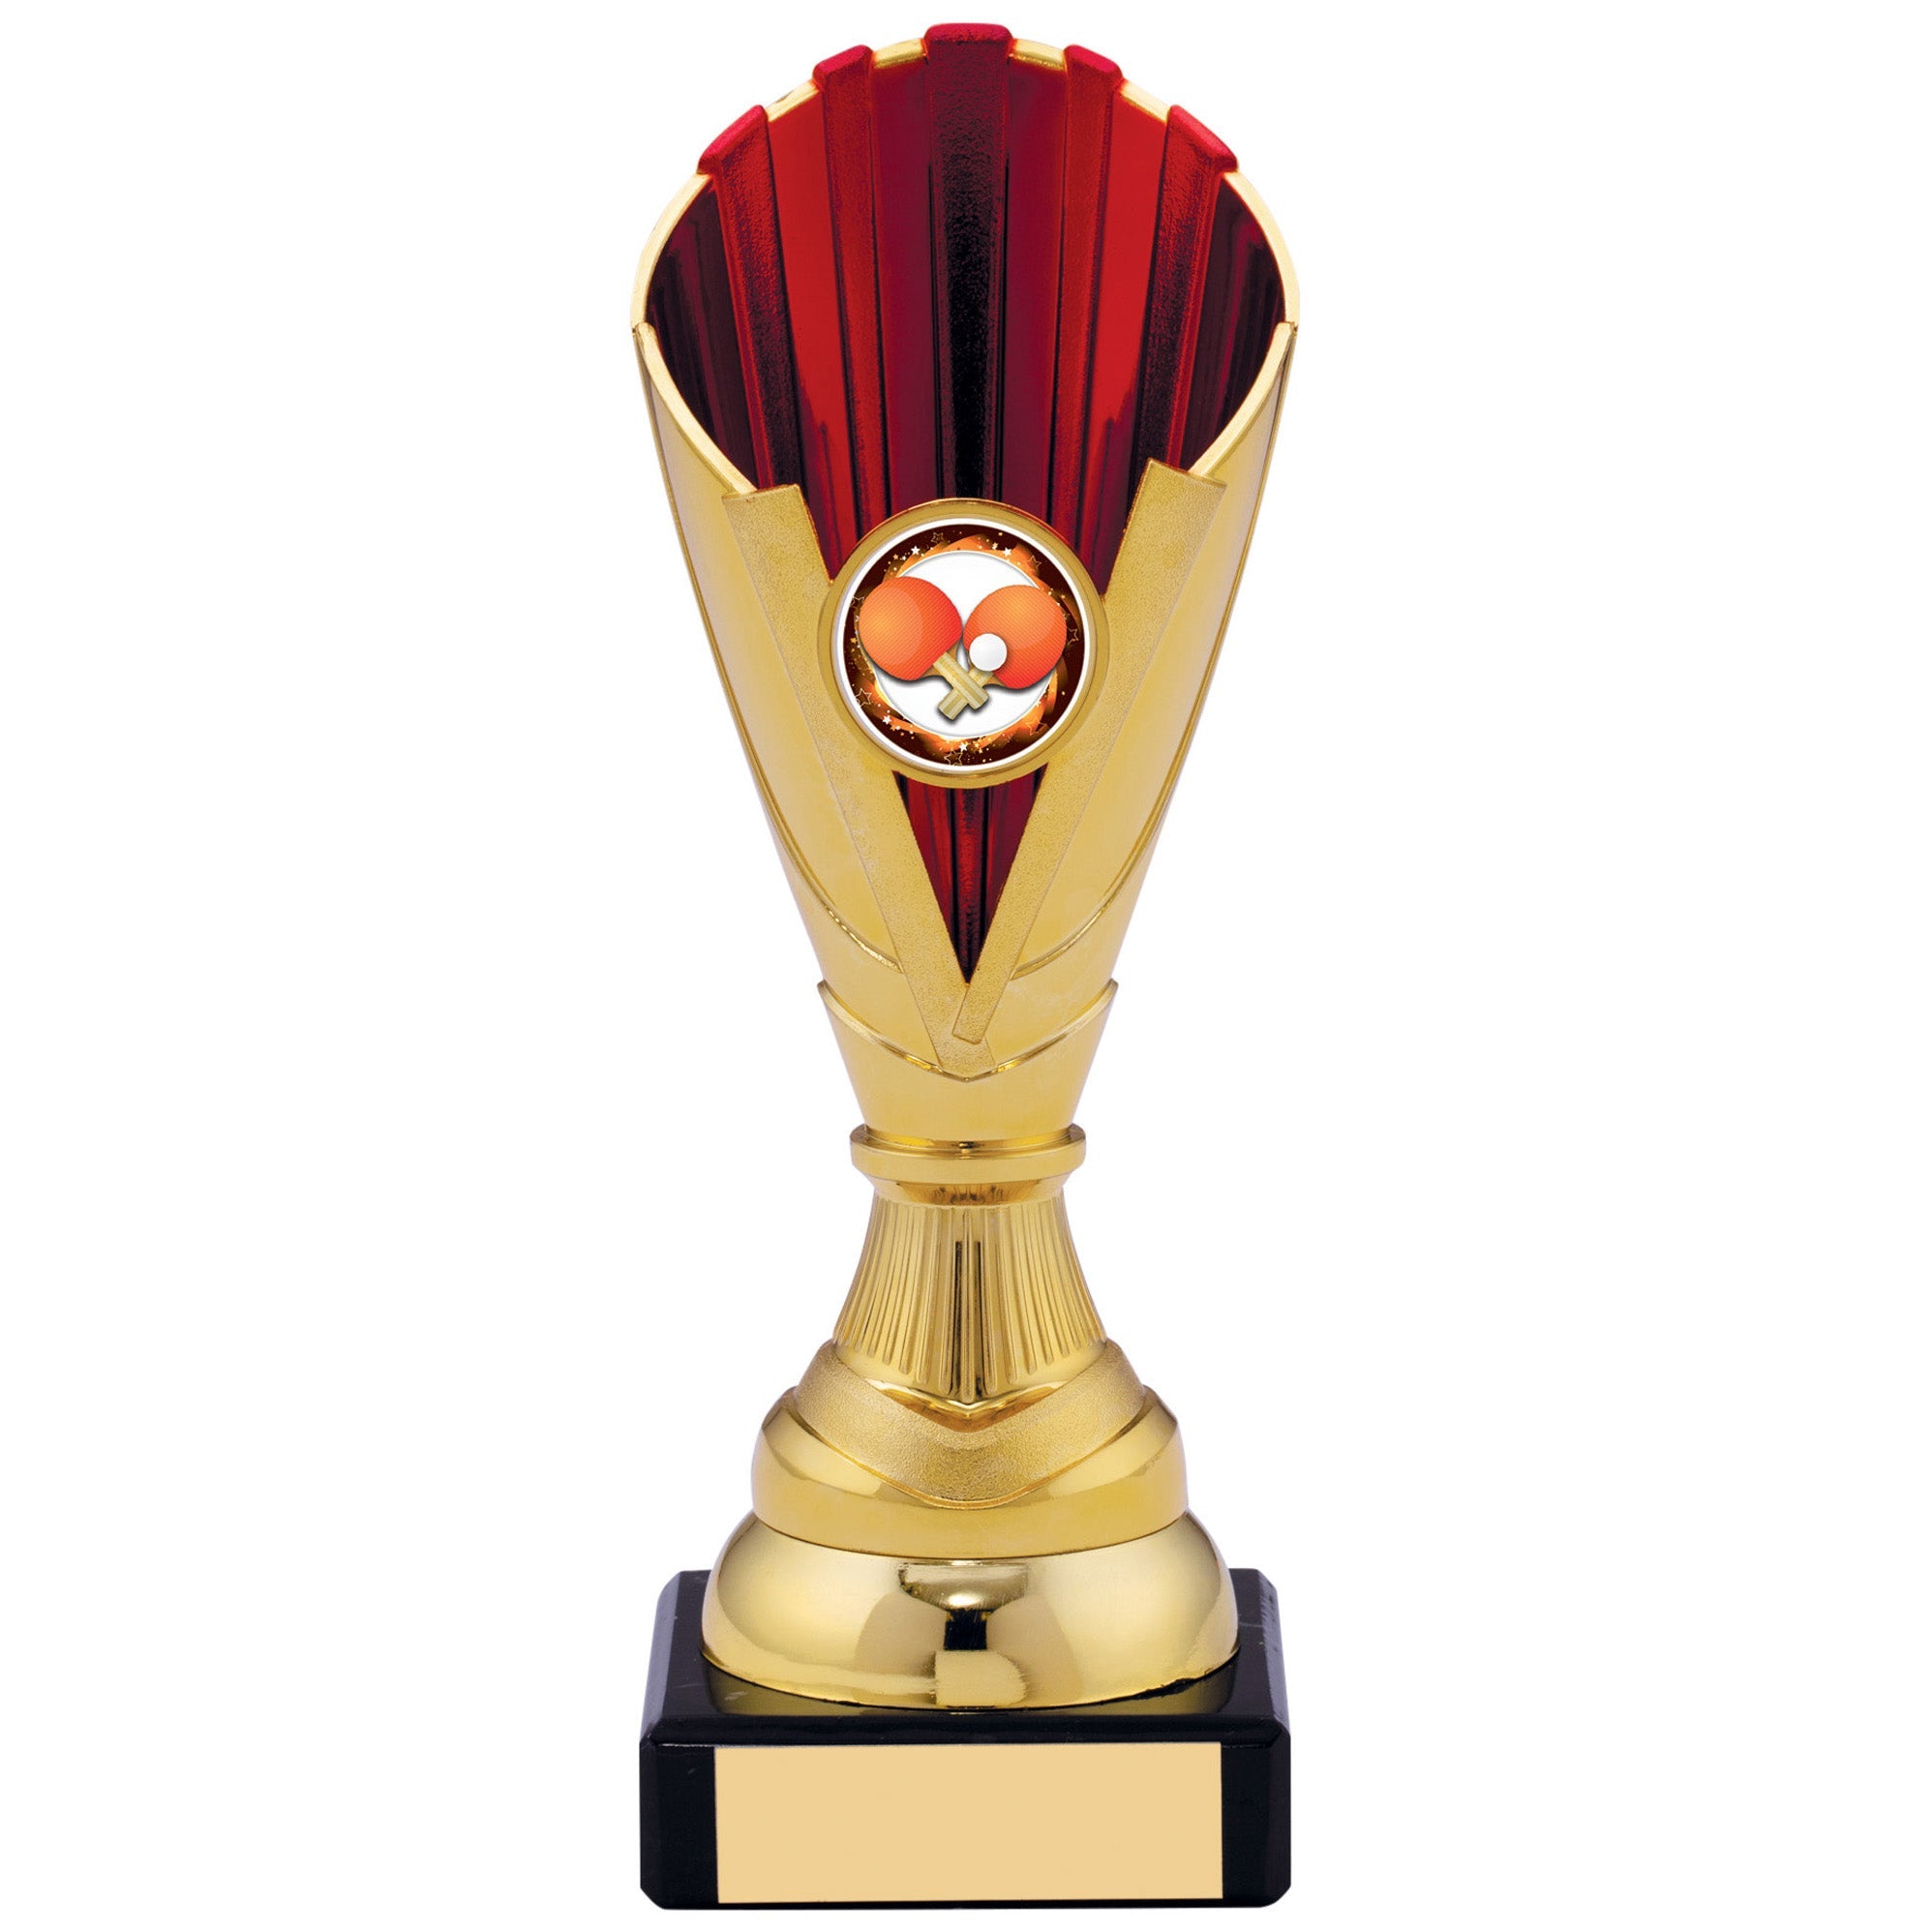 Gold and Red Plastic Trophy Cup on Black Marble Base